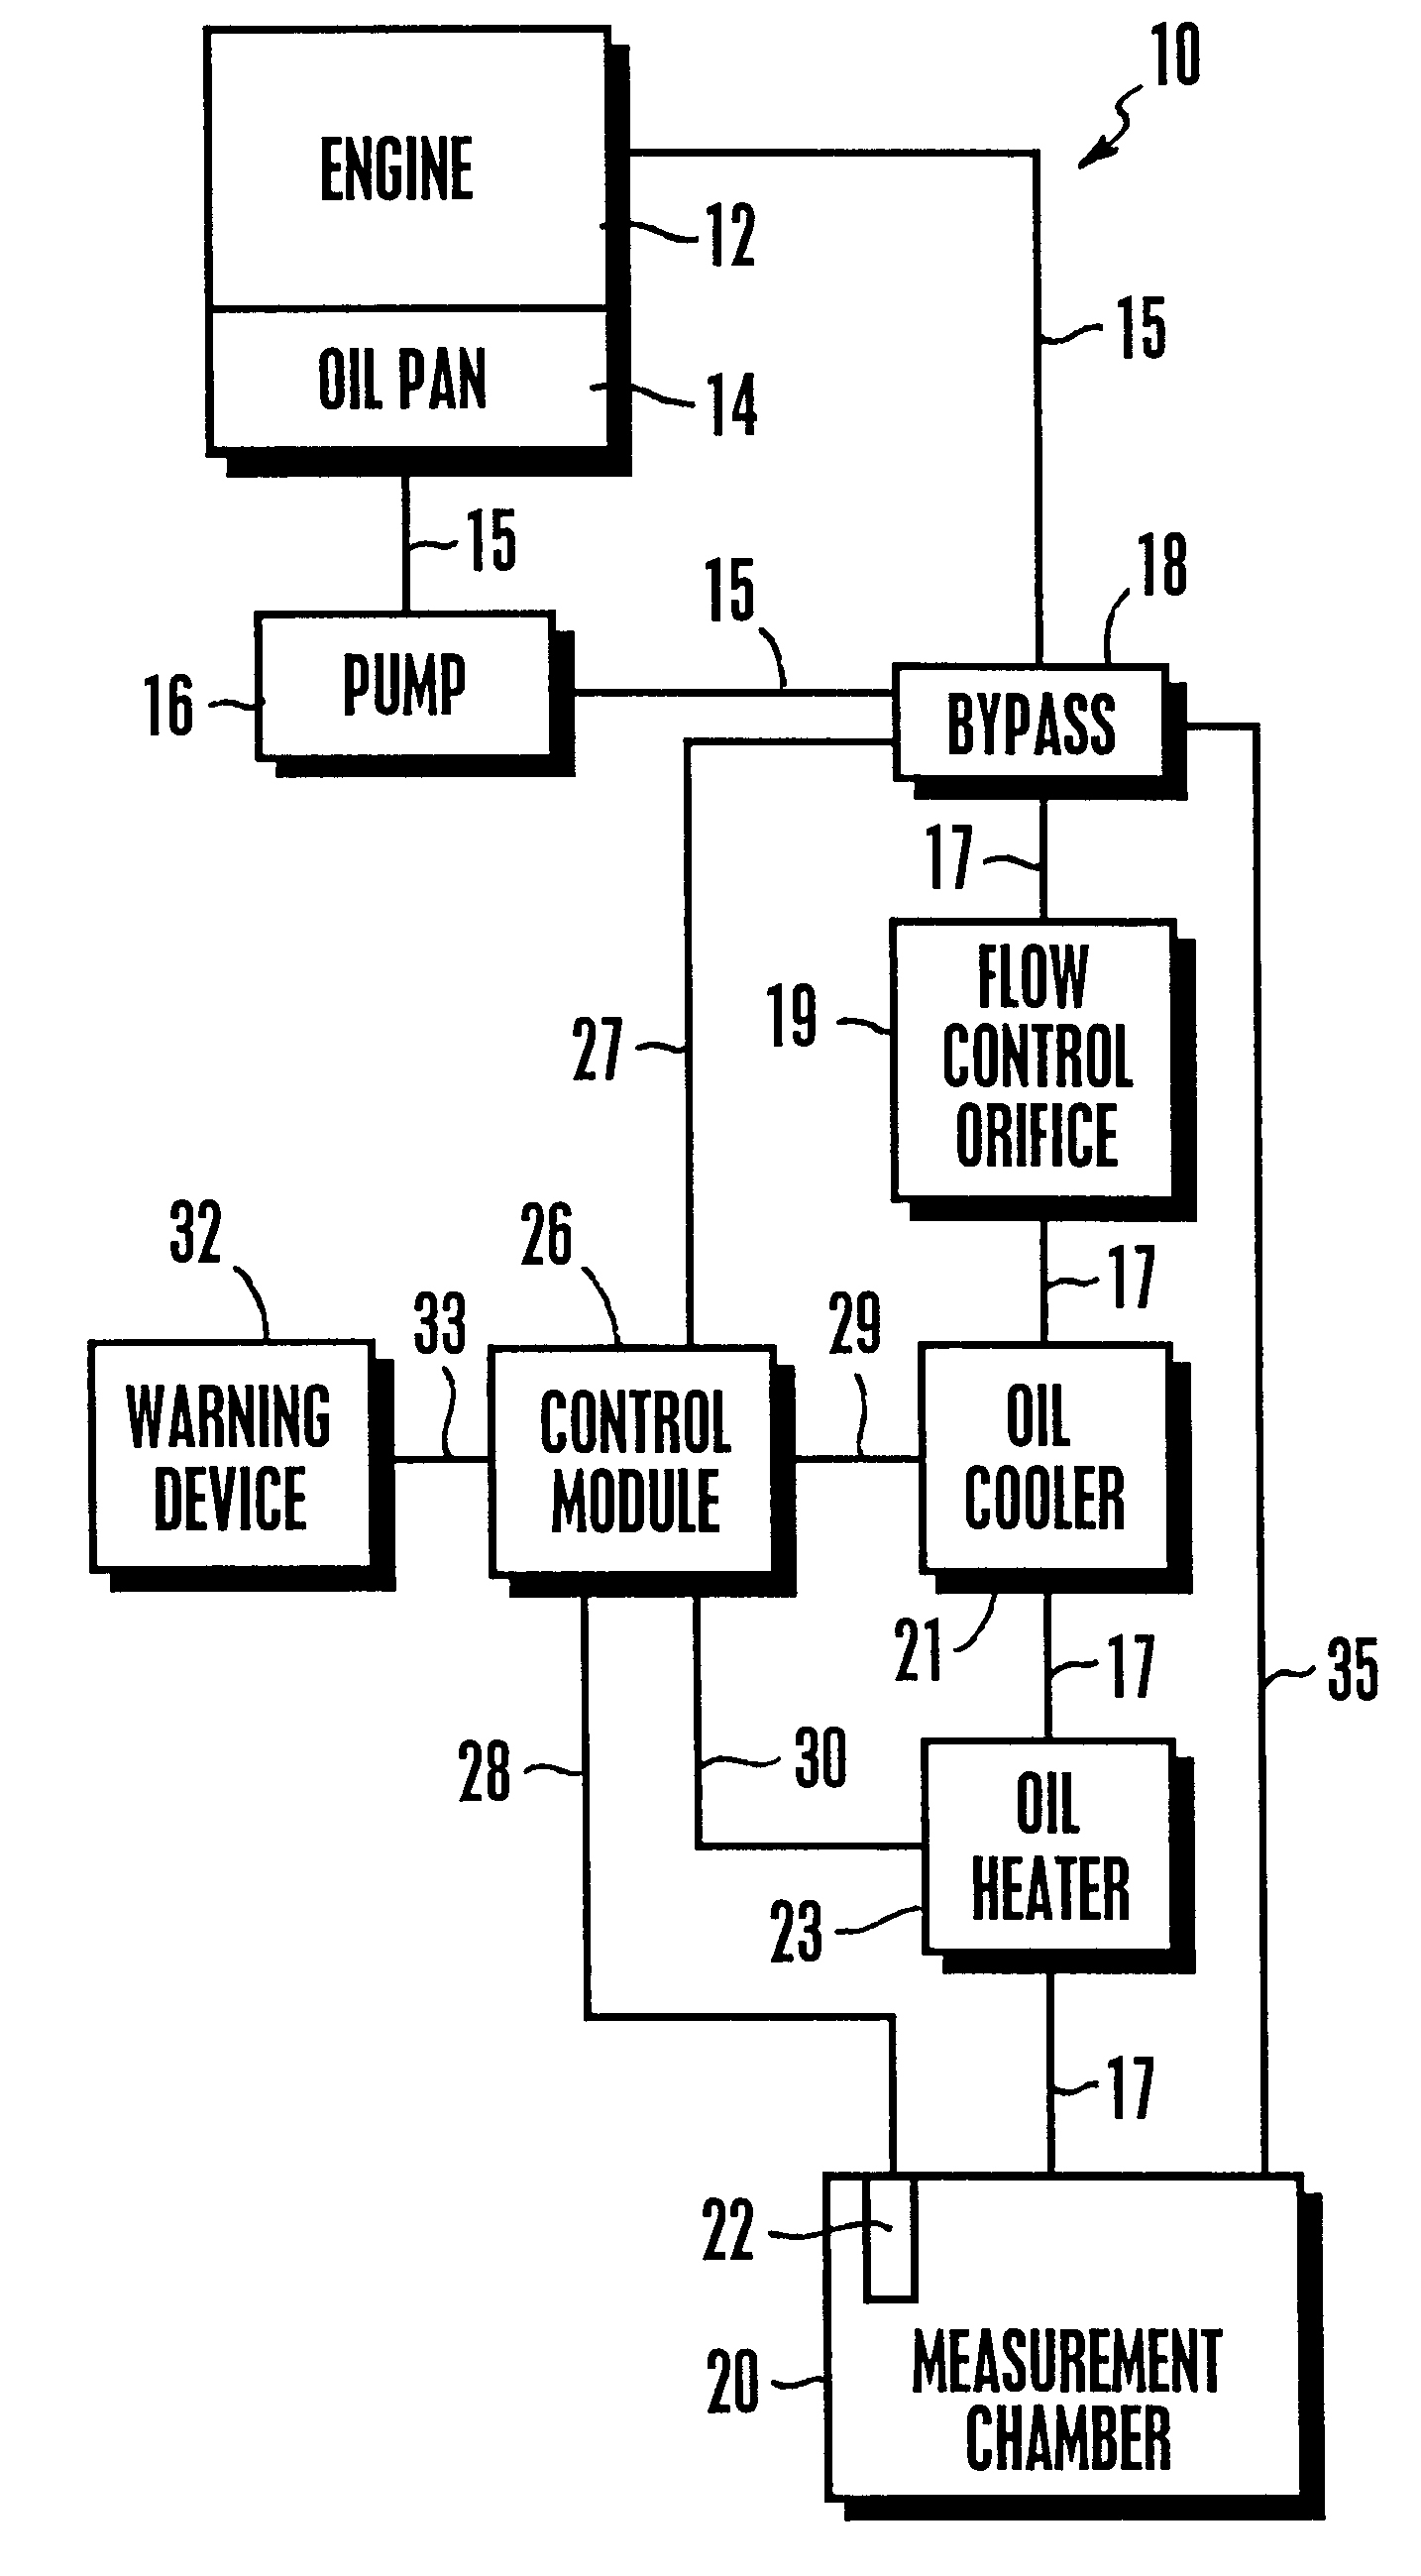 System and method for measuring oil condition in large engines